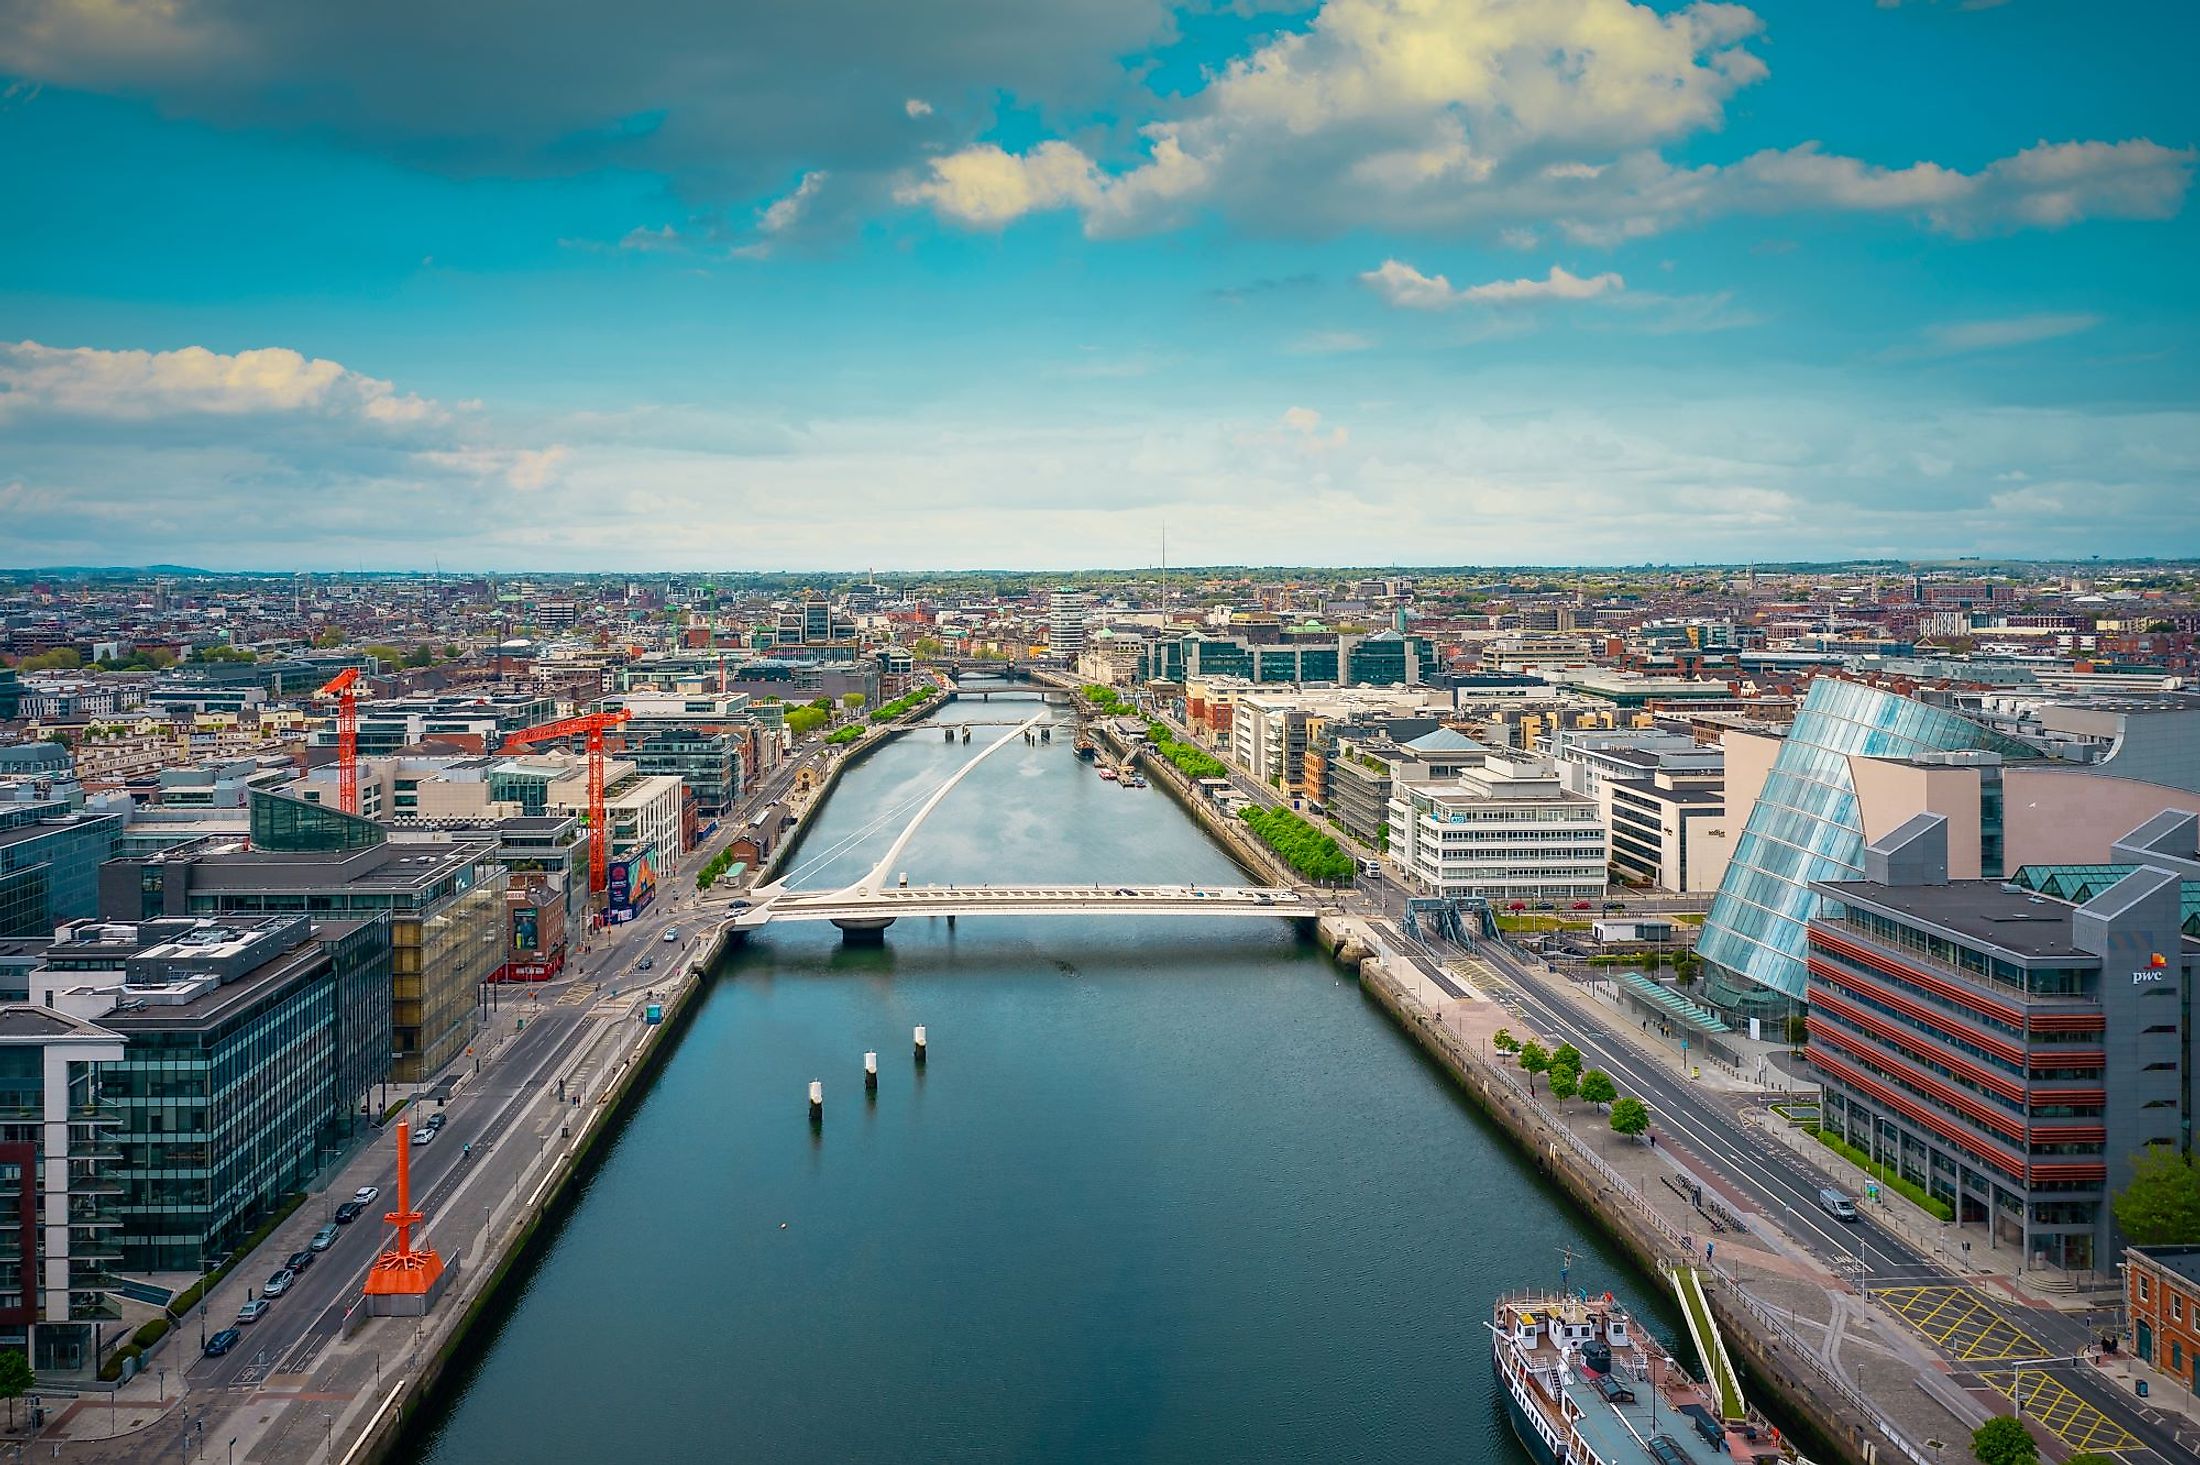 Aerial view of the Dublin city center at sunset with River Liffey and Samuel Beckett Bridge. Editorial credit: 4H4 Photography / Shutterstock.com